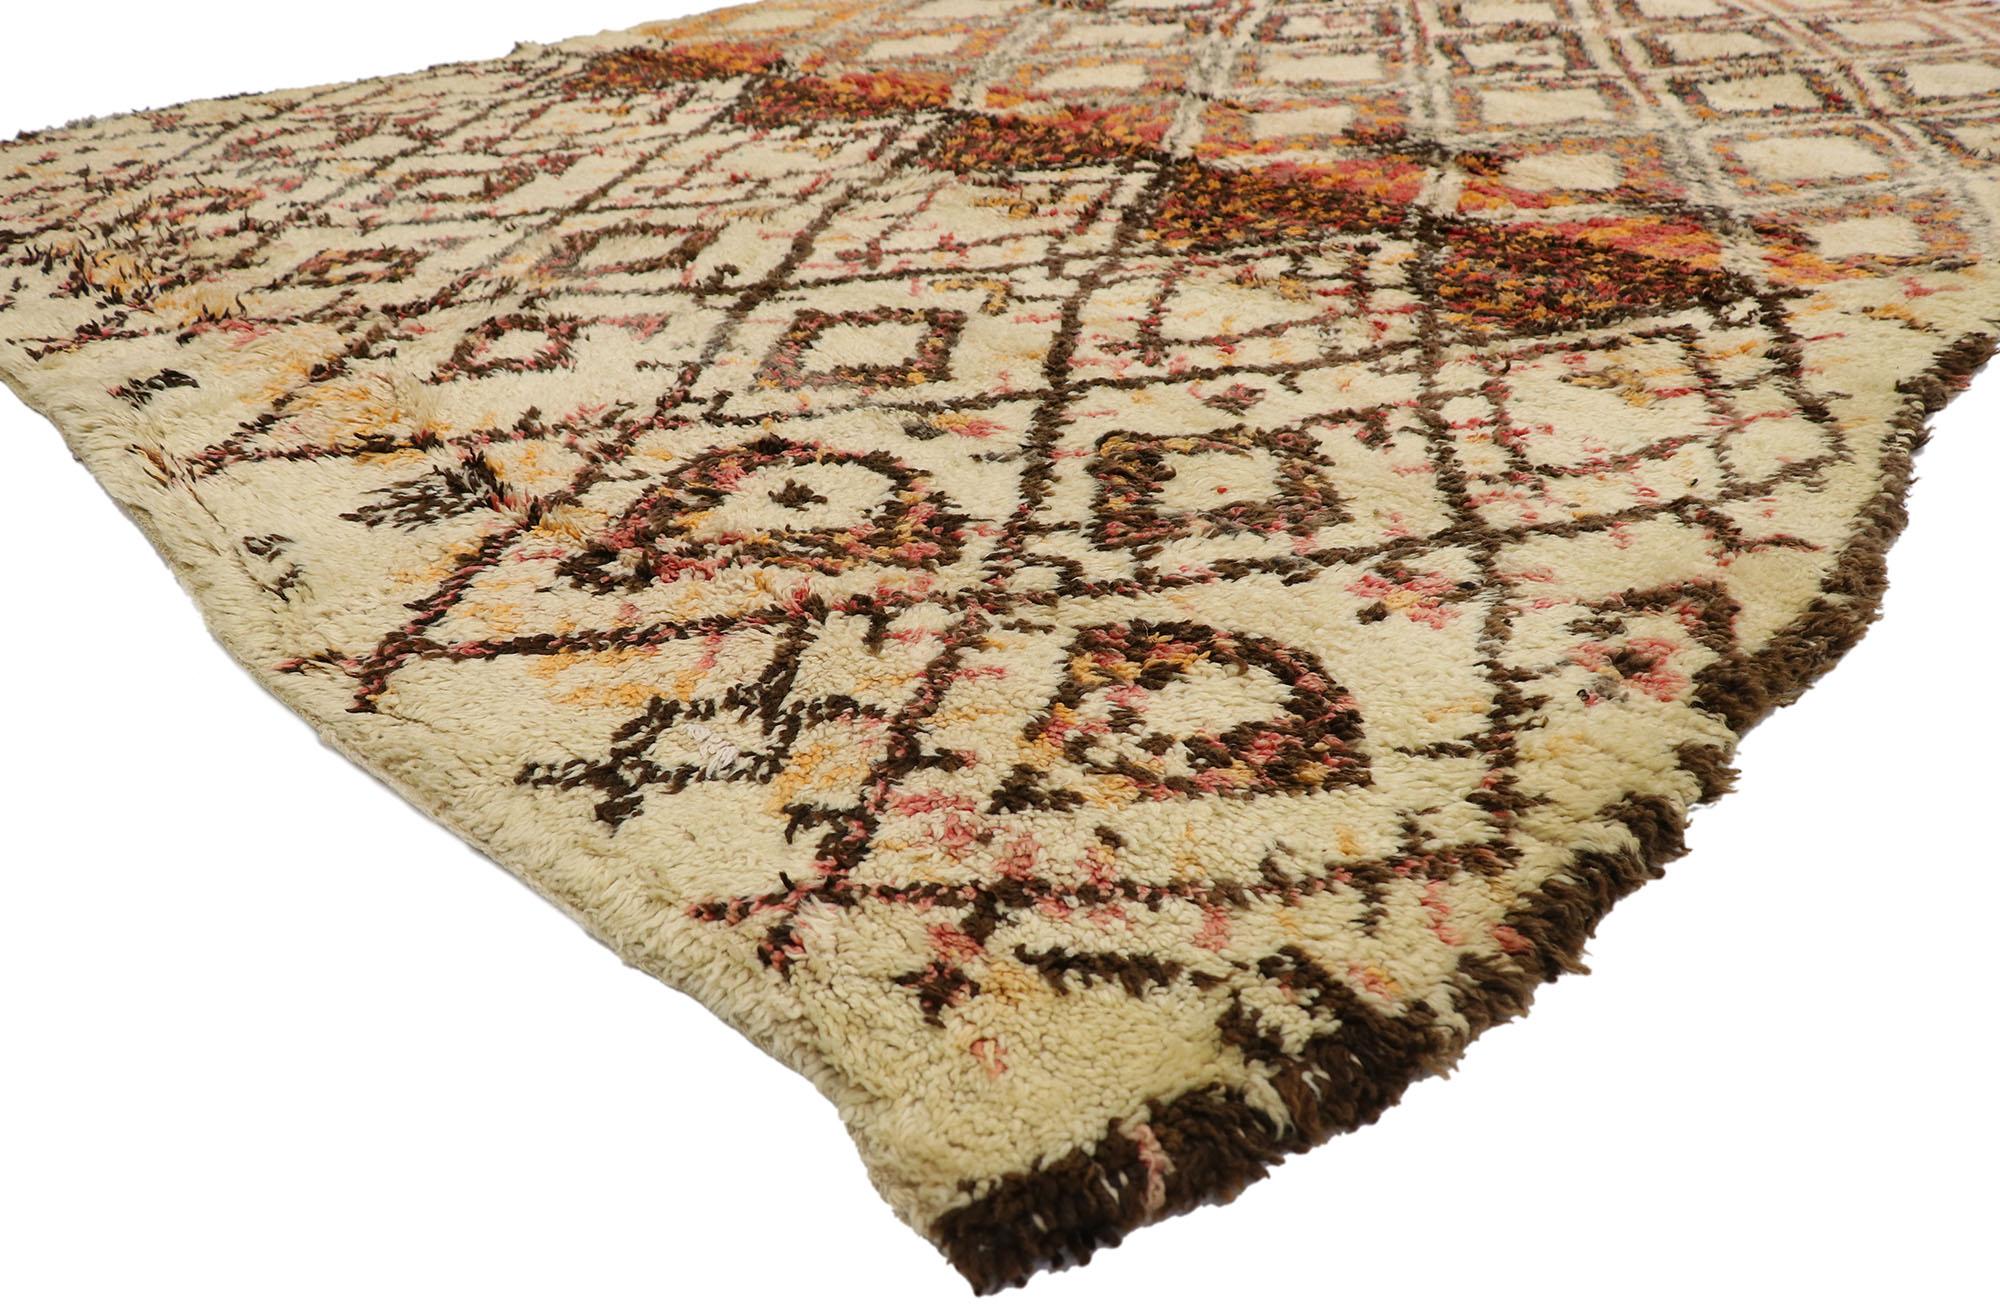 21353, vintage Berber Beni Ourain Moroccan rug with Tribal style. With its simplicity, plush pile and tribal style, this hand knotted wool vintage Berber Beni Ourain Moroccan rug is a captivating vision of woven beauty. It features a diamond lattice